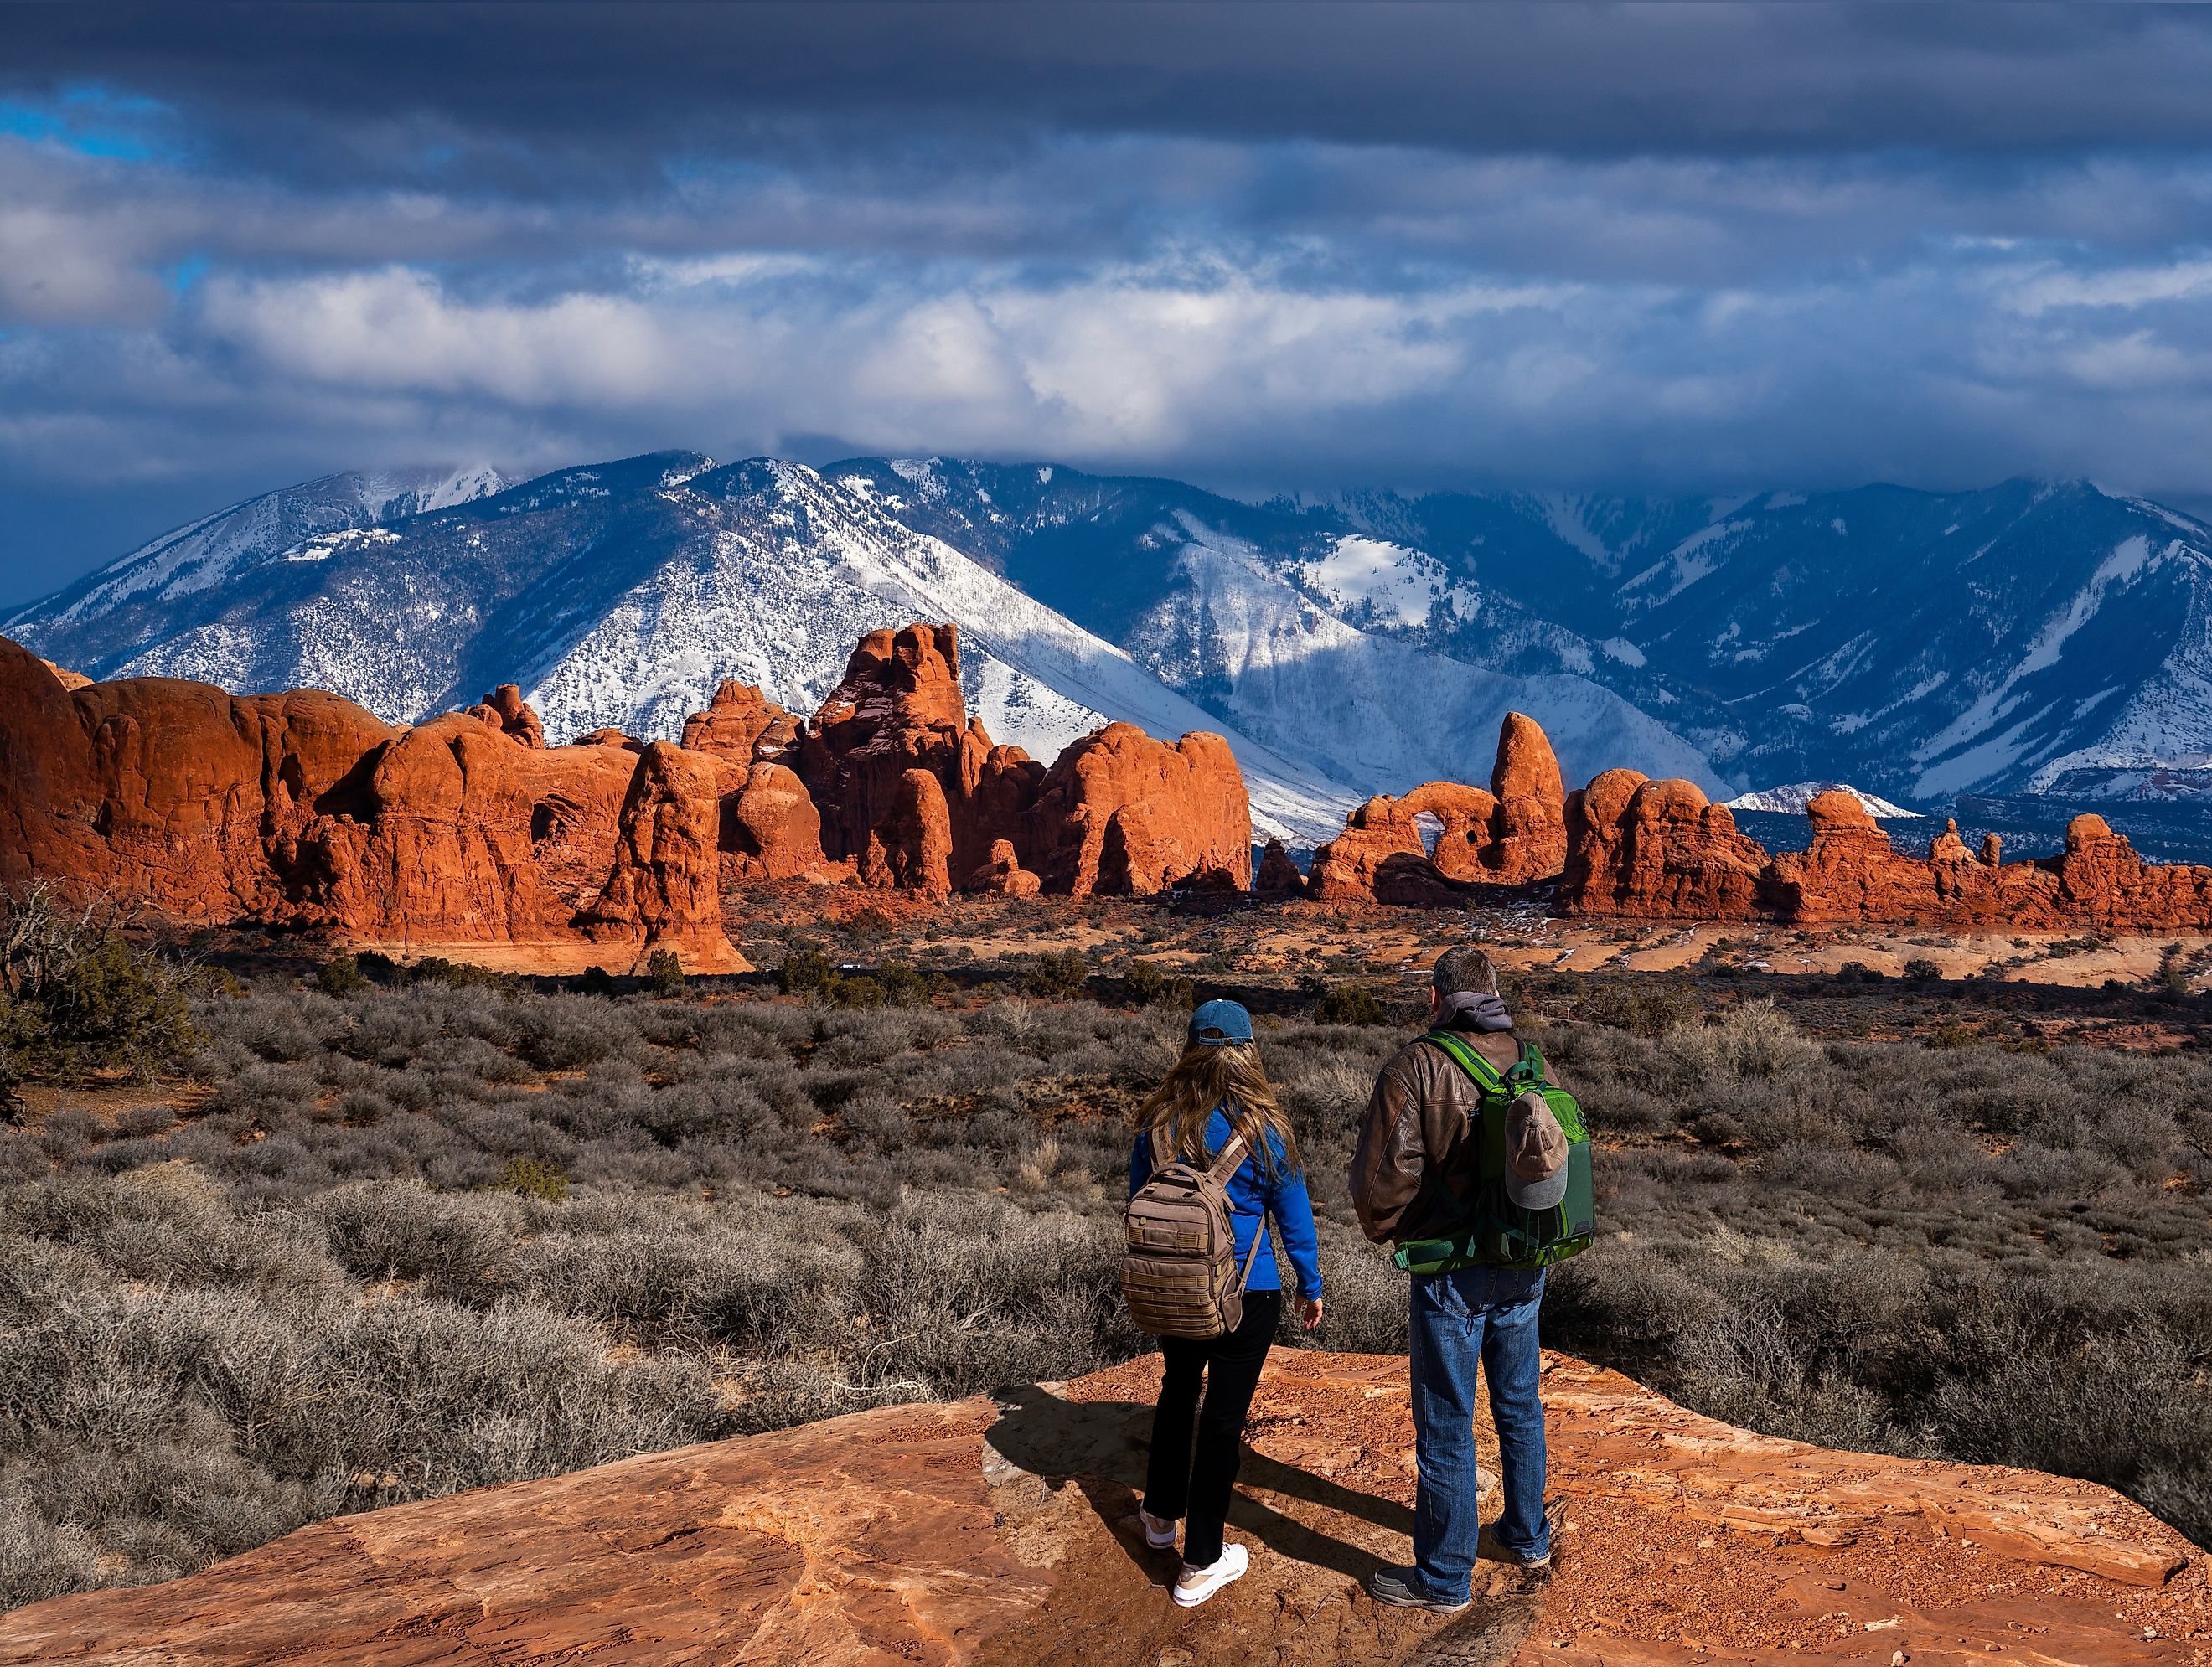 Couple enjoying a beautiful mountain view on a hiking trip in Utah, with the Windows Section of the park and snow-covered La Sal Mountains in the background. Arches National Park, Moab, Utah, USA.